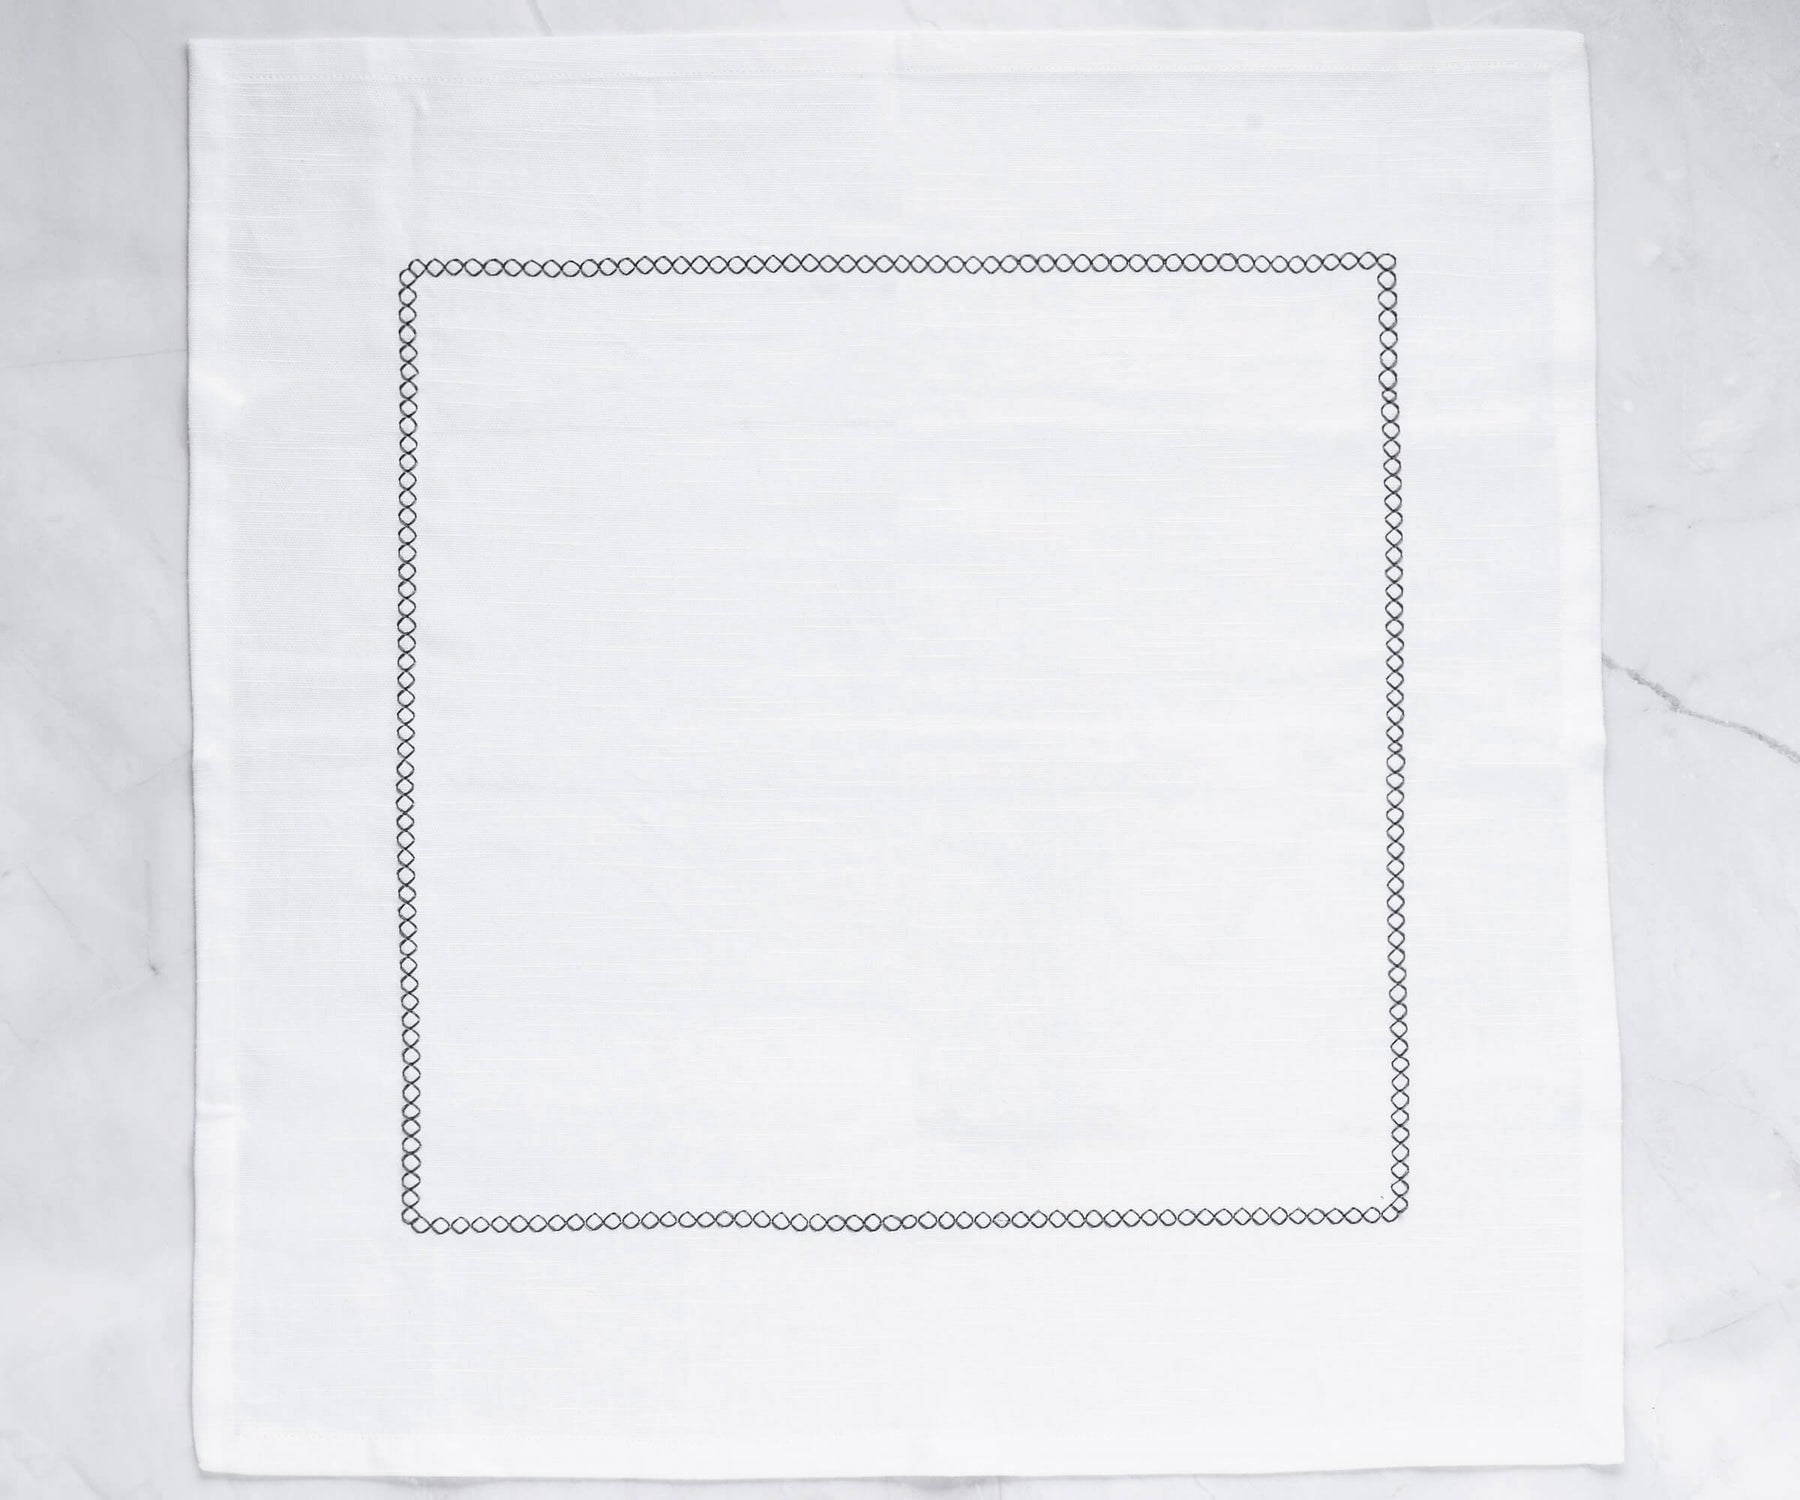 fall napkins or linen napkins bulk is the most absorbent fabric napkins. square napkins are woven cloth napkins.